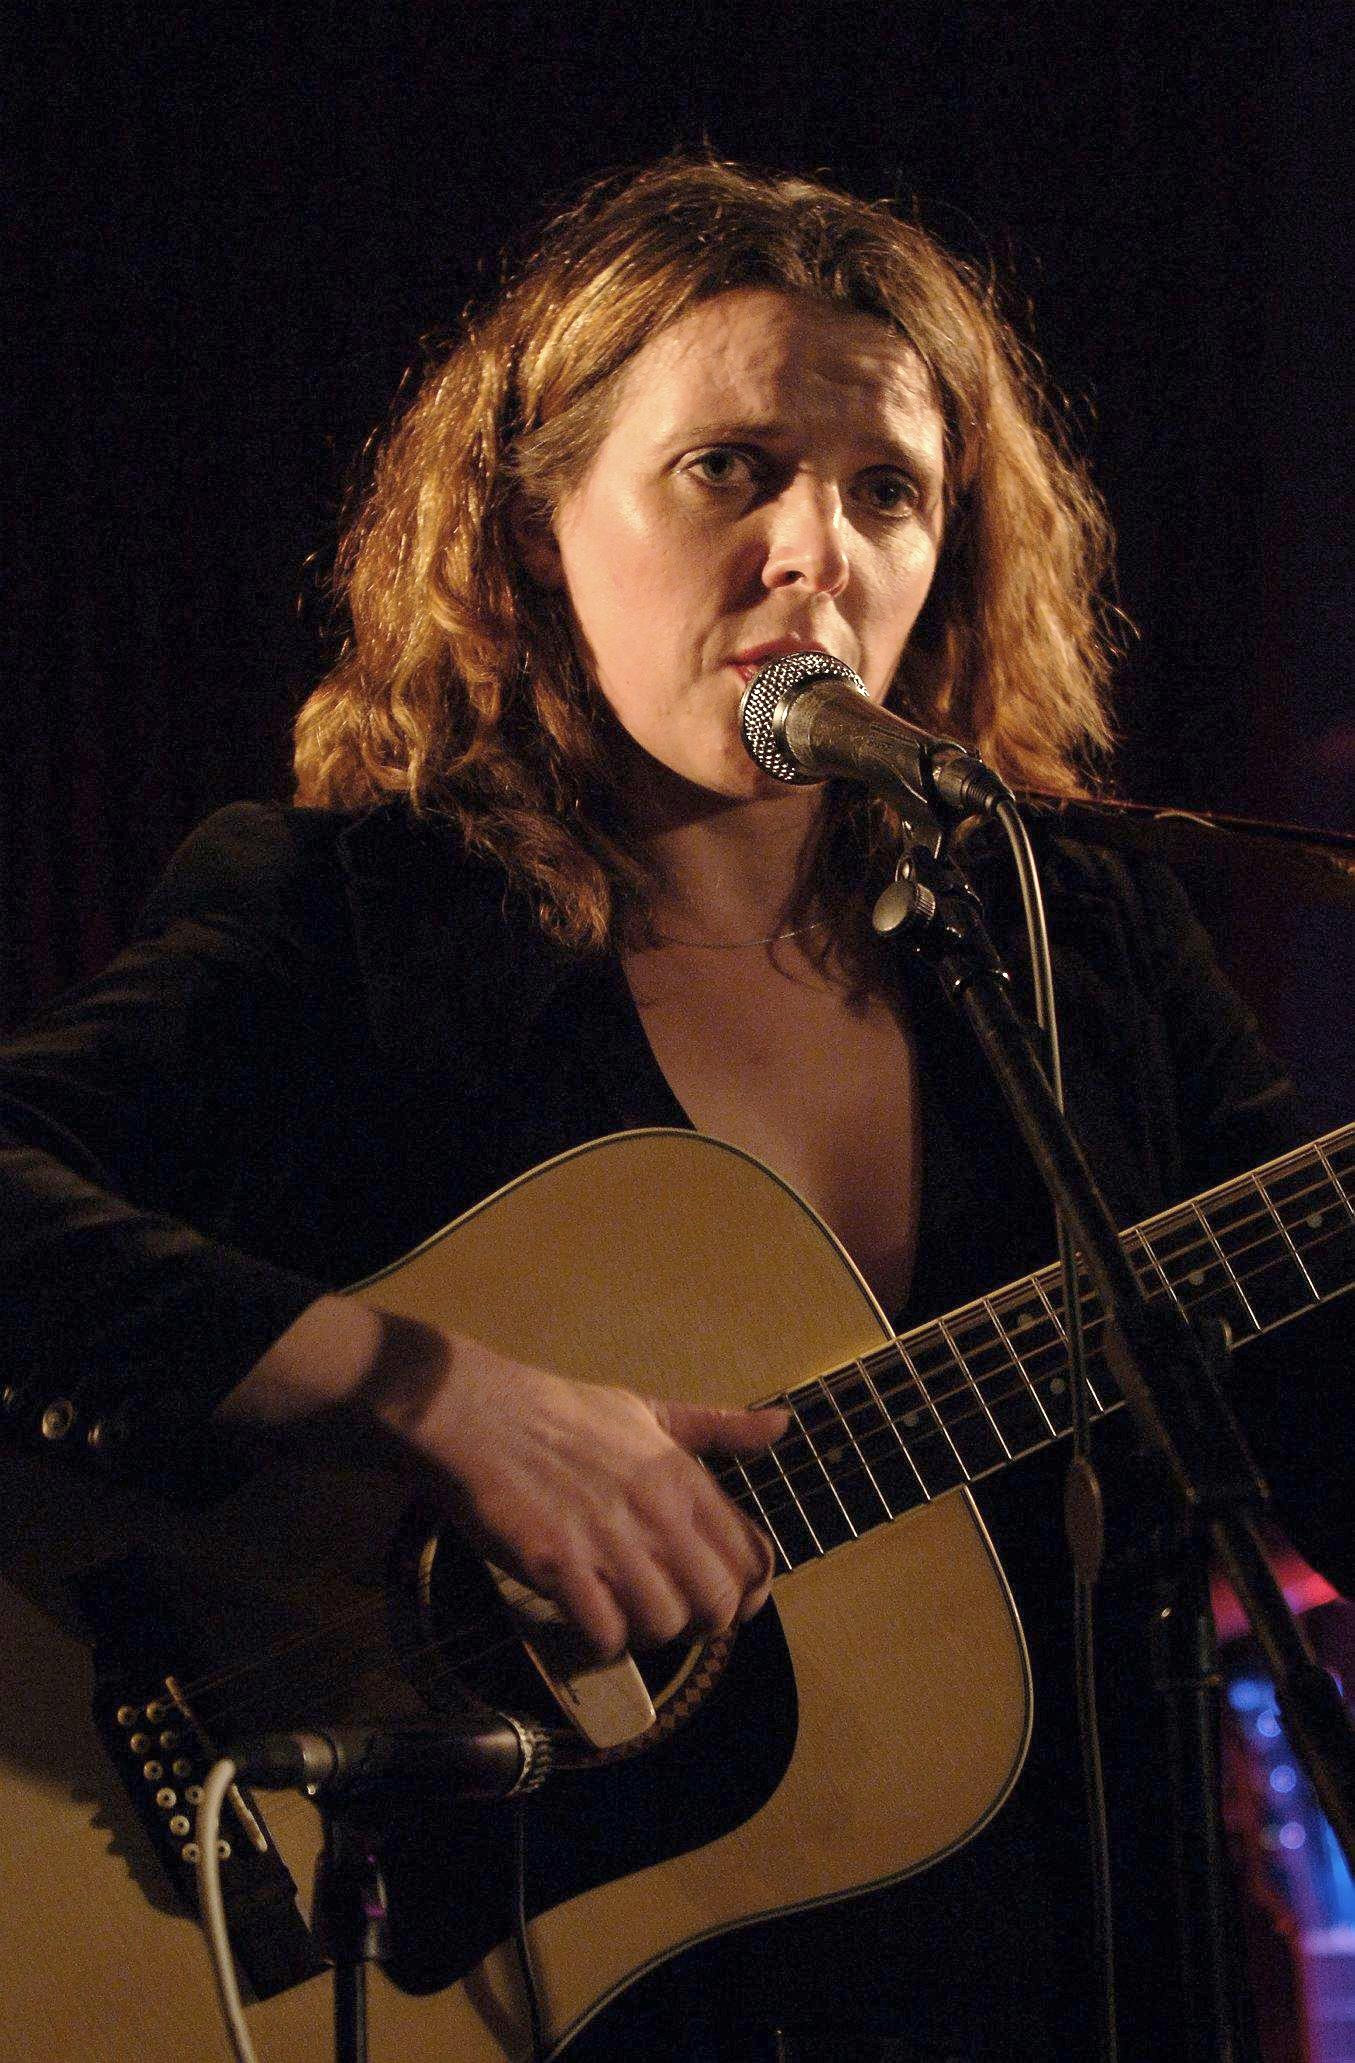 Abigail Hopkins (daughter of Sir Anthony Hopkins) performs onstage at The Garage, Highbury Corner, north London, on February 21, 2006. | Source: Getty Images